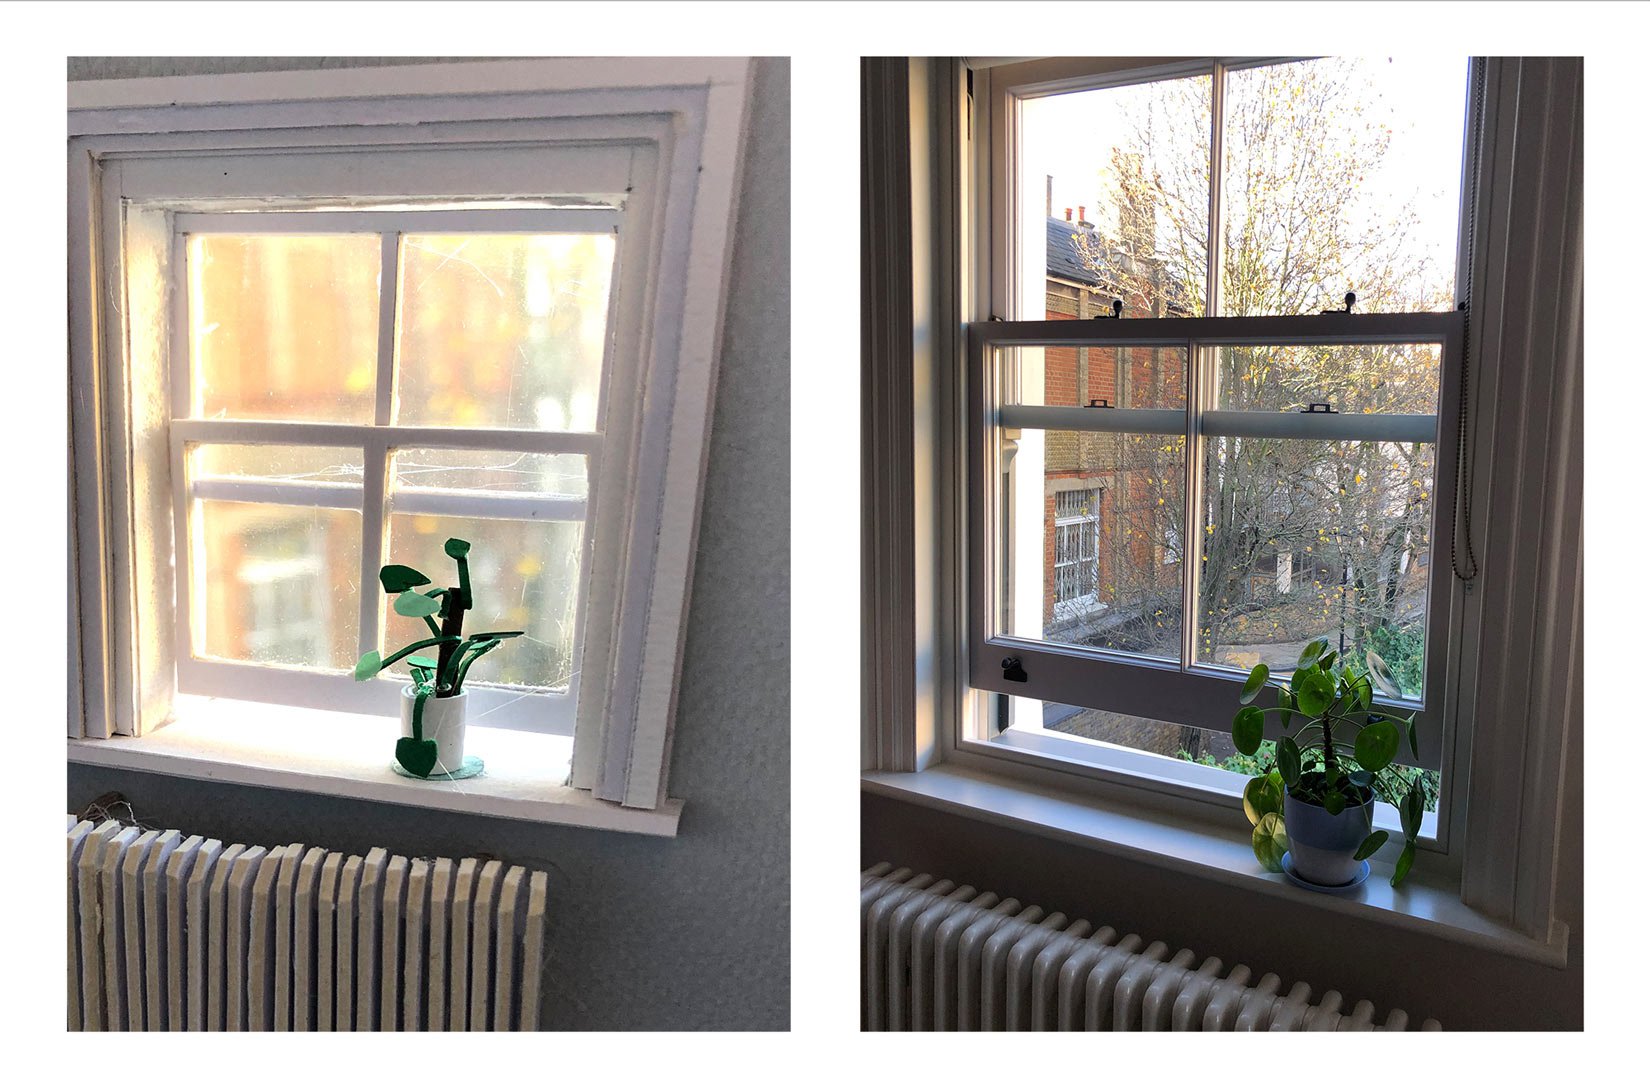 Two images next to each other showing in comparison the inside of a room in a model on the left and the inside of the same room in reality. Both images look towards a window. There is a flower pot on the windowsill which in the model is made out of paper